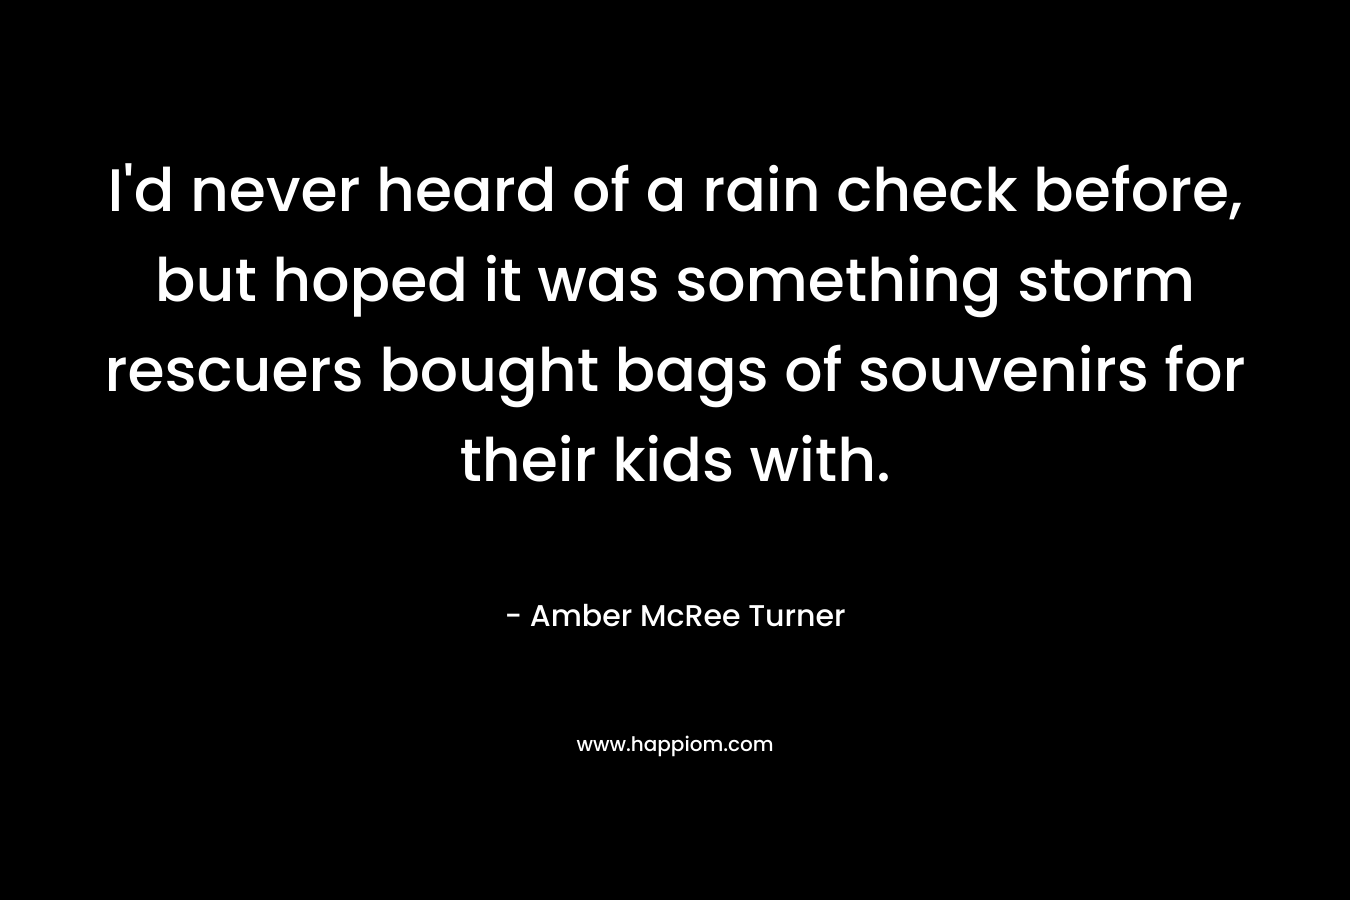 I'd never heard of a rain check before, but hoped it was something storm rescuers bought bags of souvenirs for their kids with.